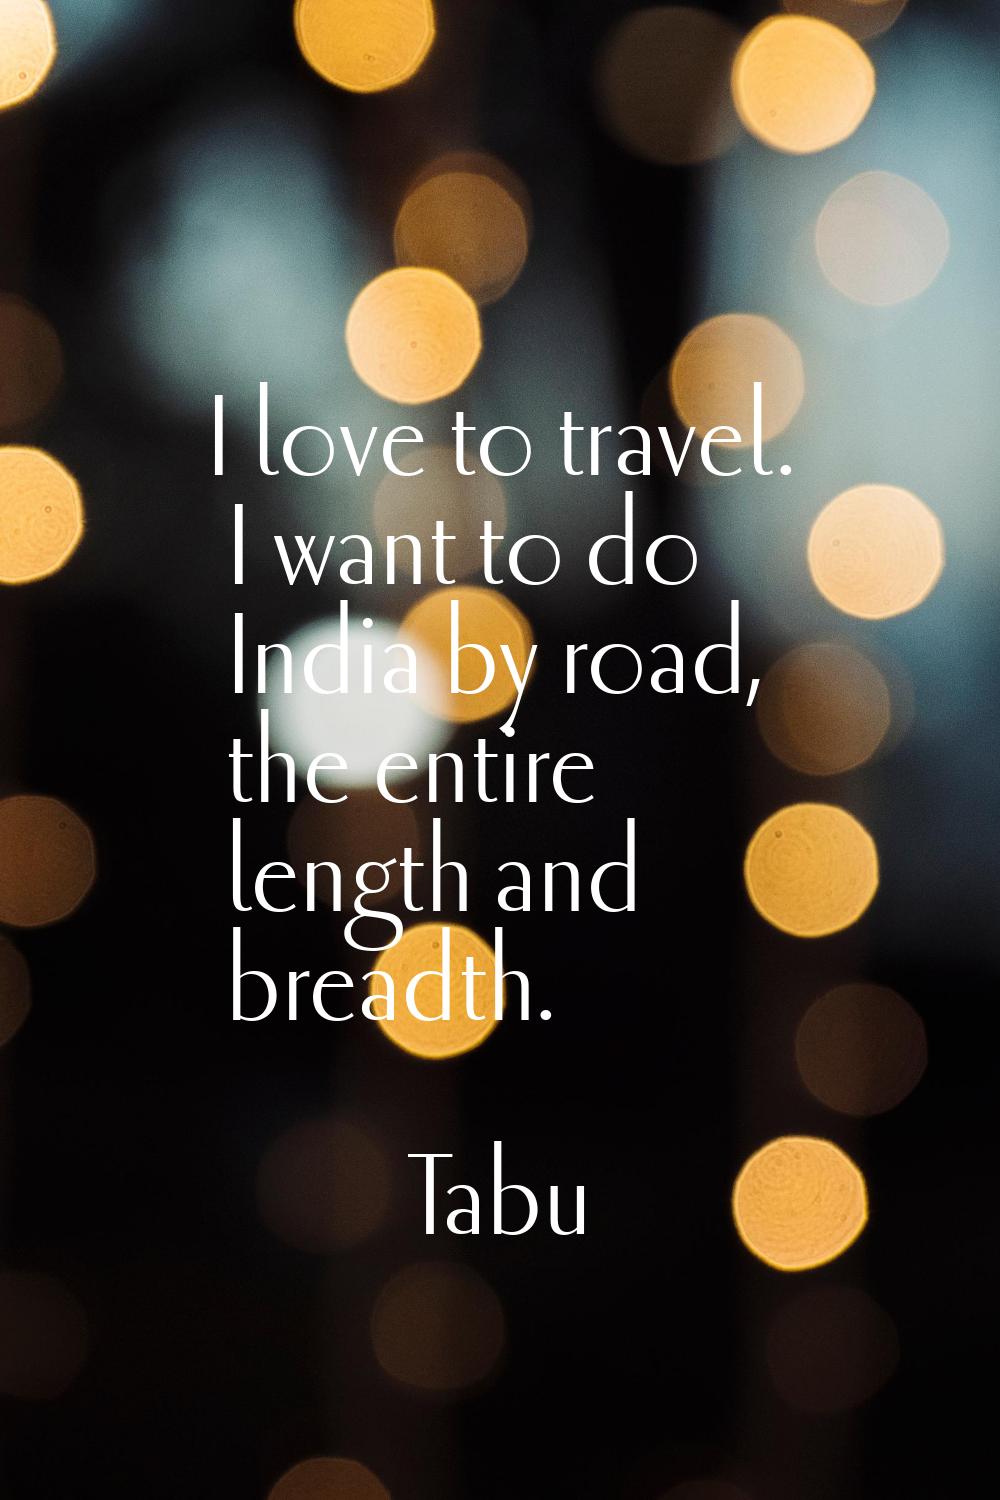 I love to travel. I want to do India by road, the entire length and breadth.